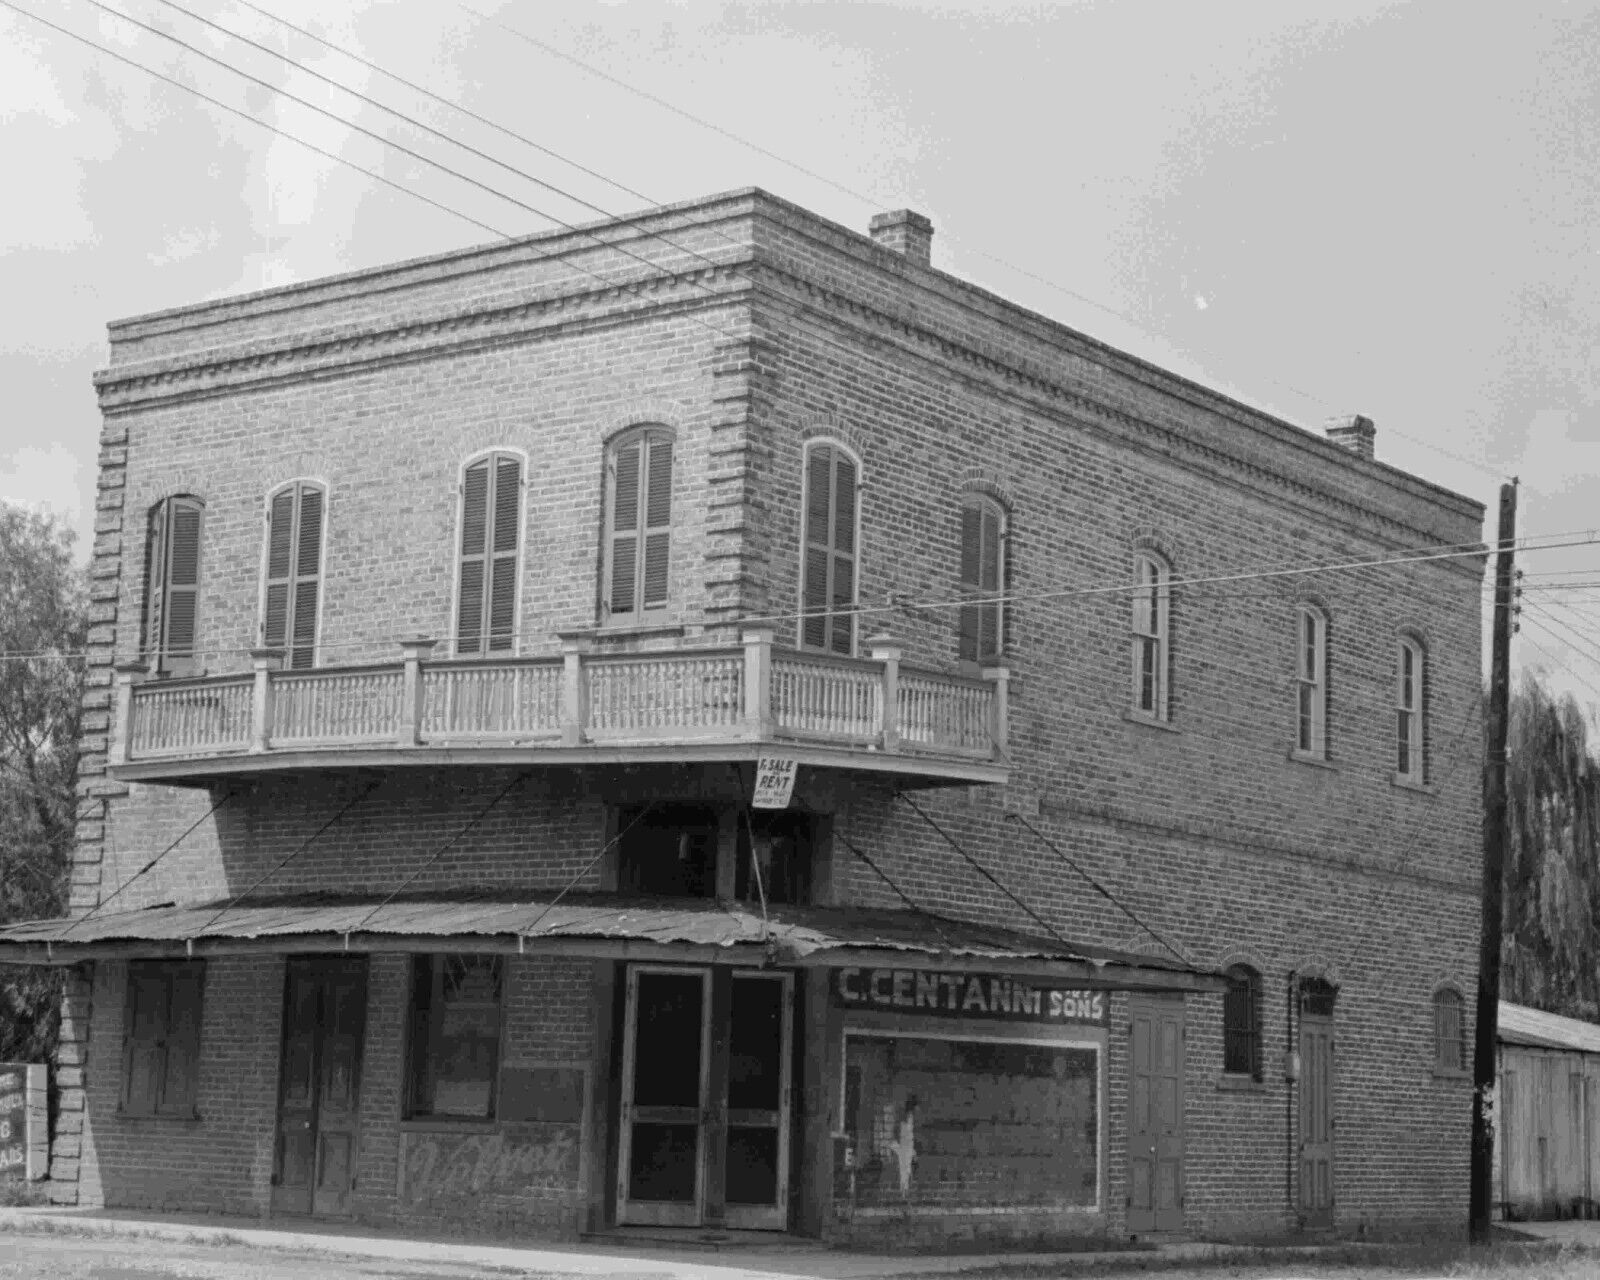 Kenner, Louisiana Vacant building C.Centanni Vintage Old Photo 8.5 x 11 Reprints